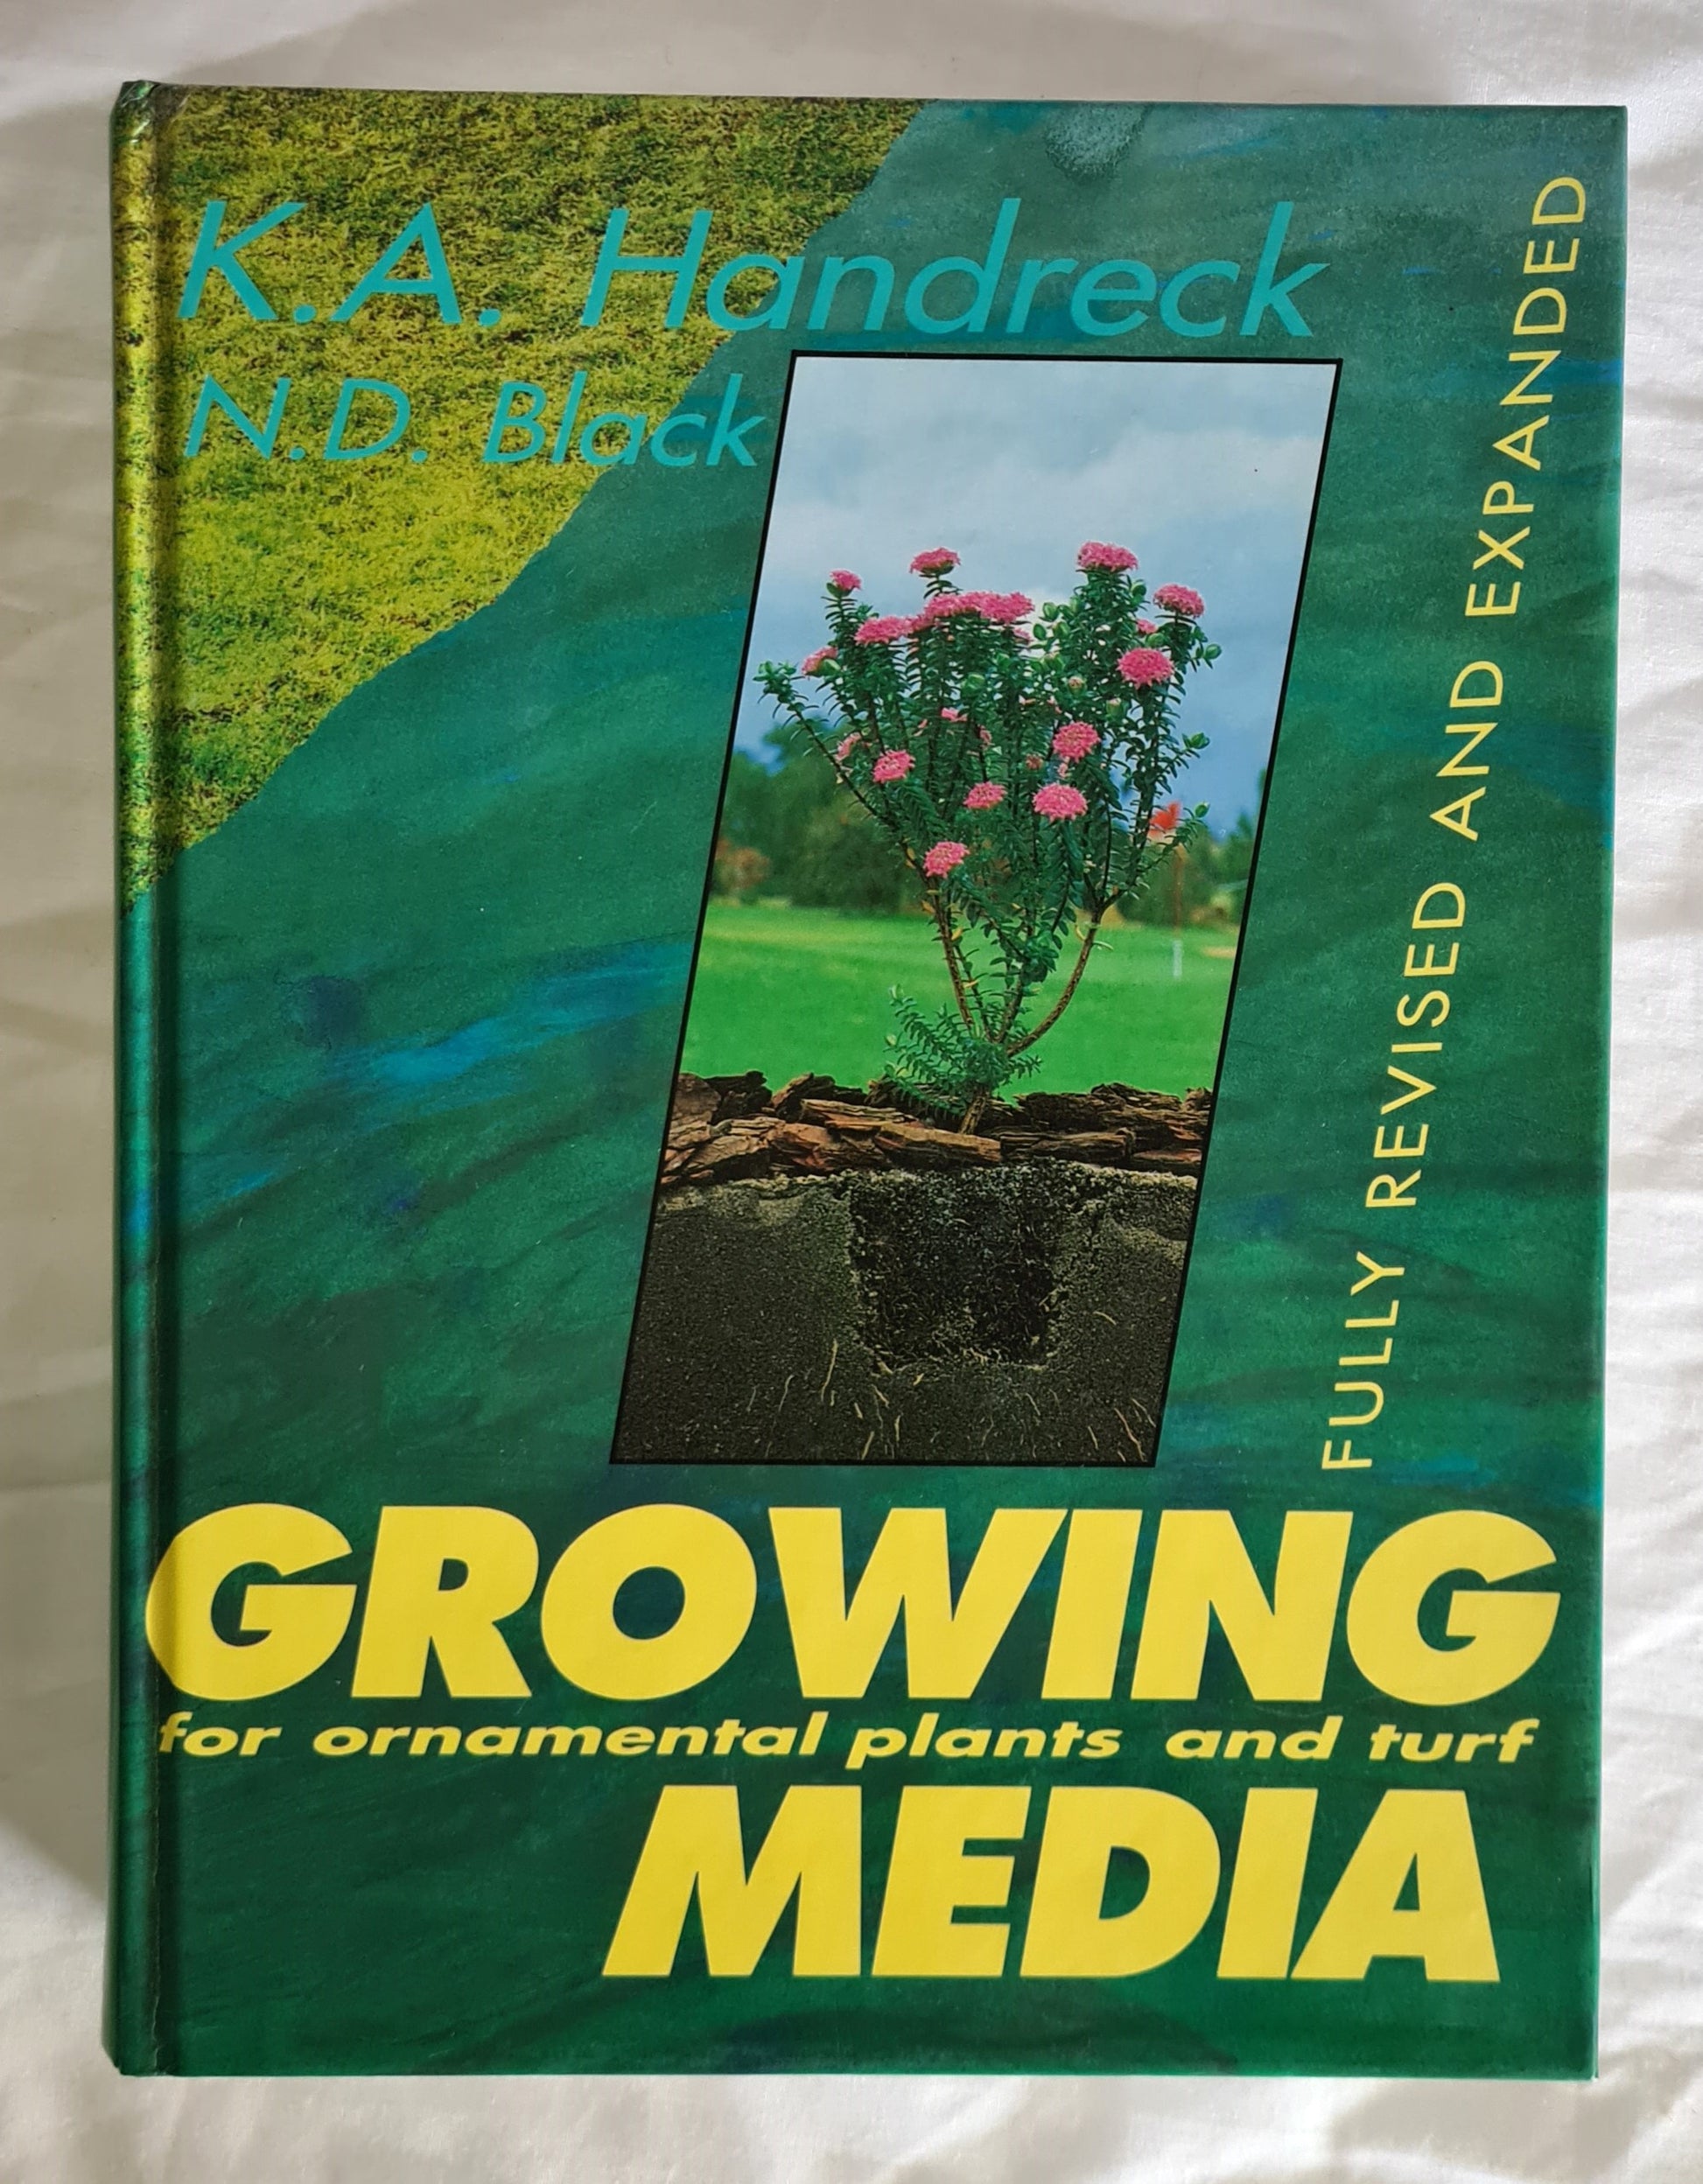 Growing Media  For ornamental plants and turf  by K. A. Handreck and N. D. Black